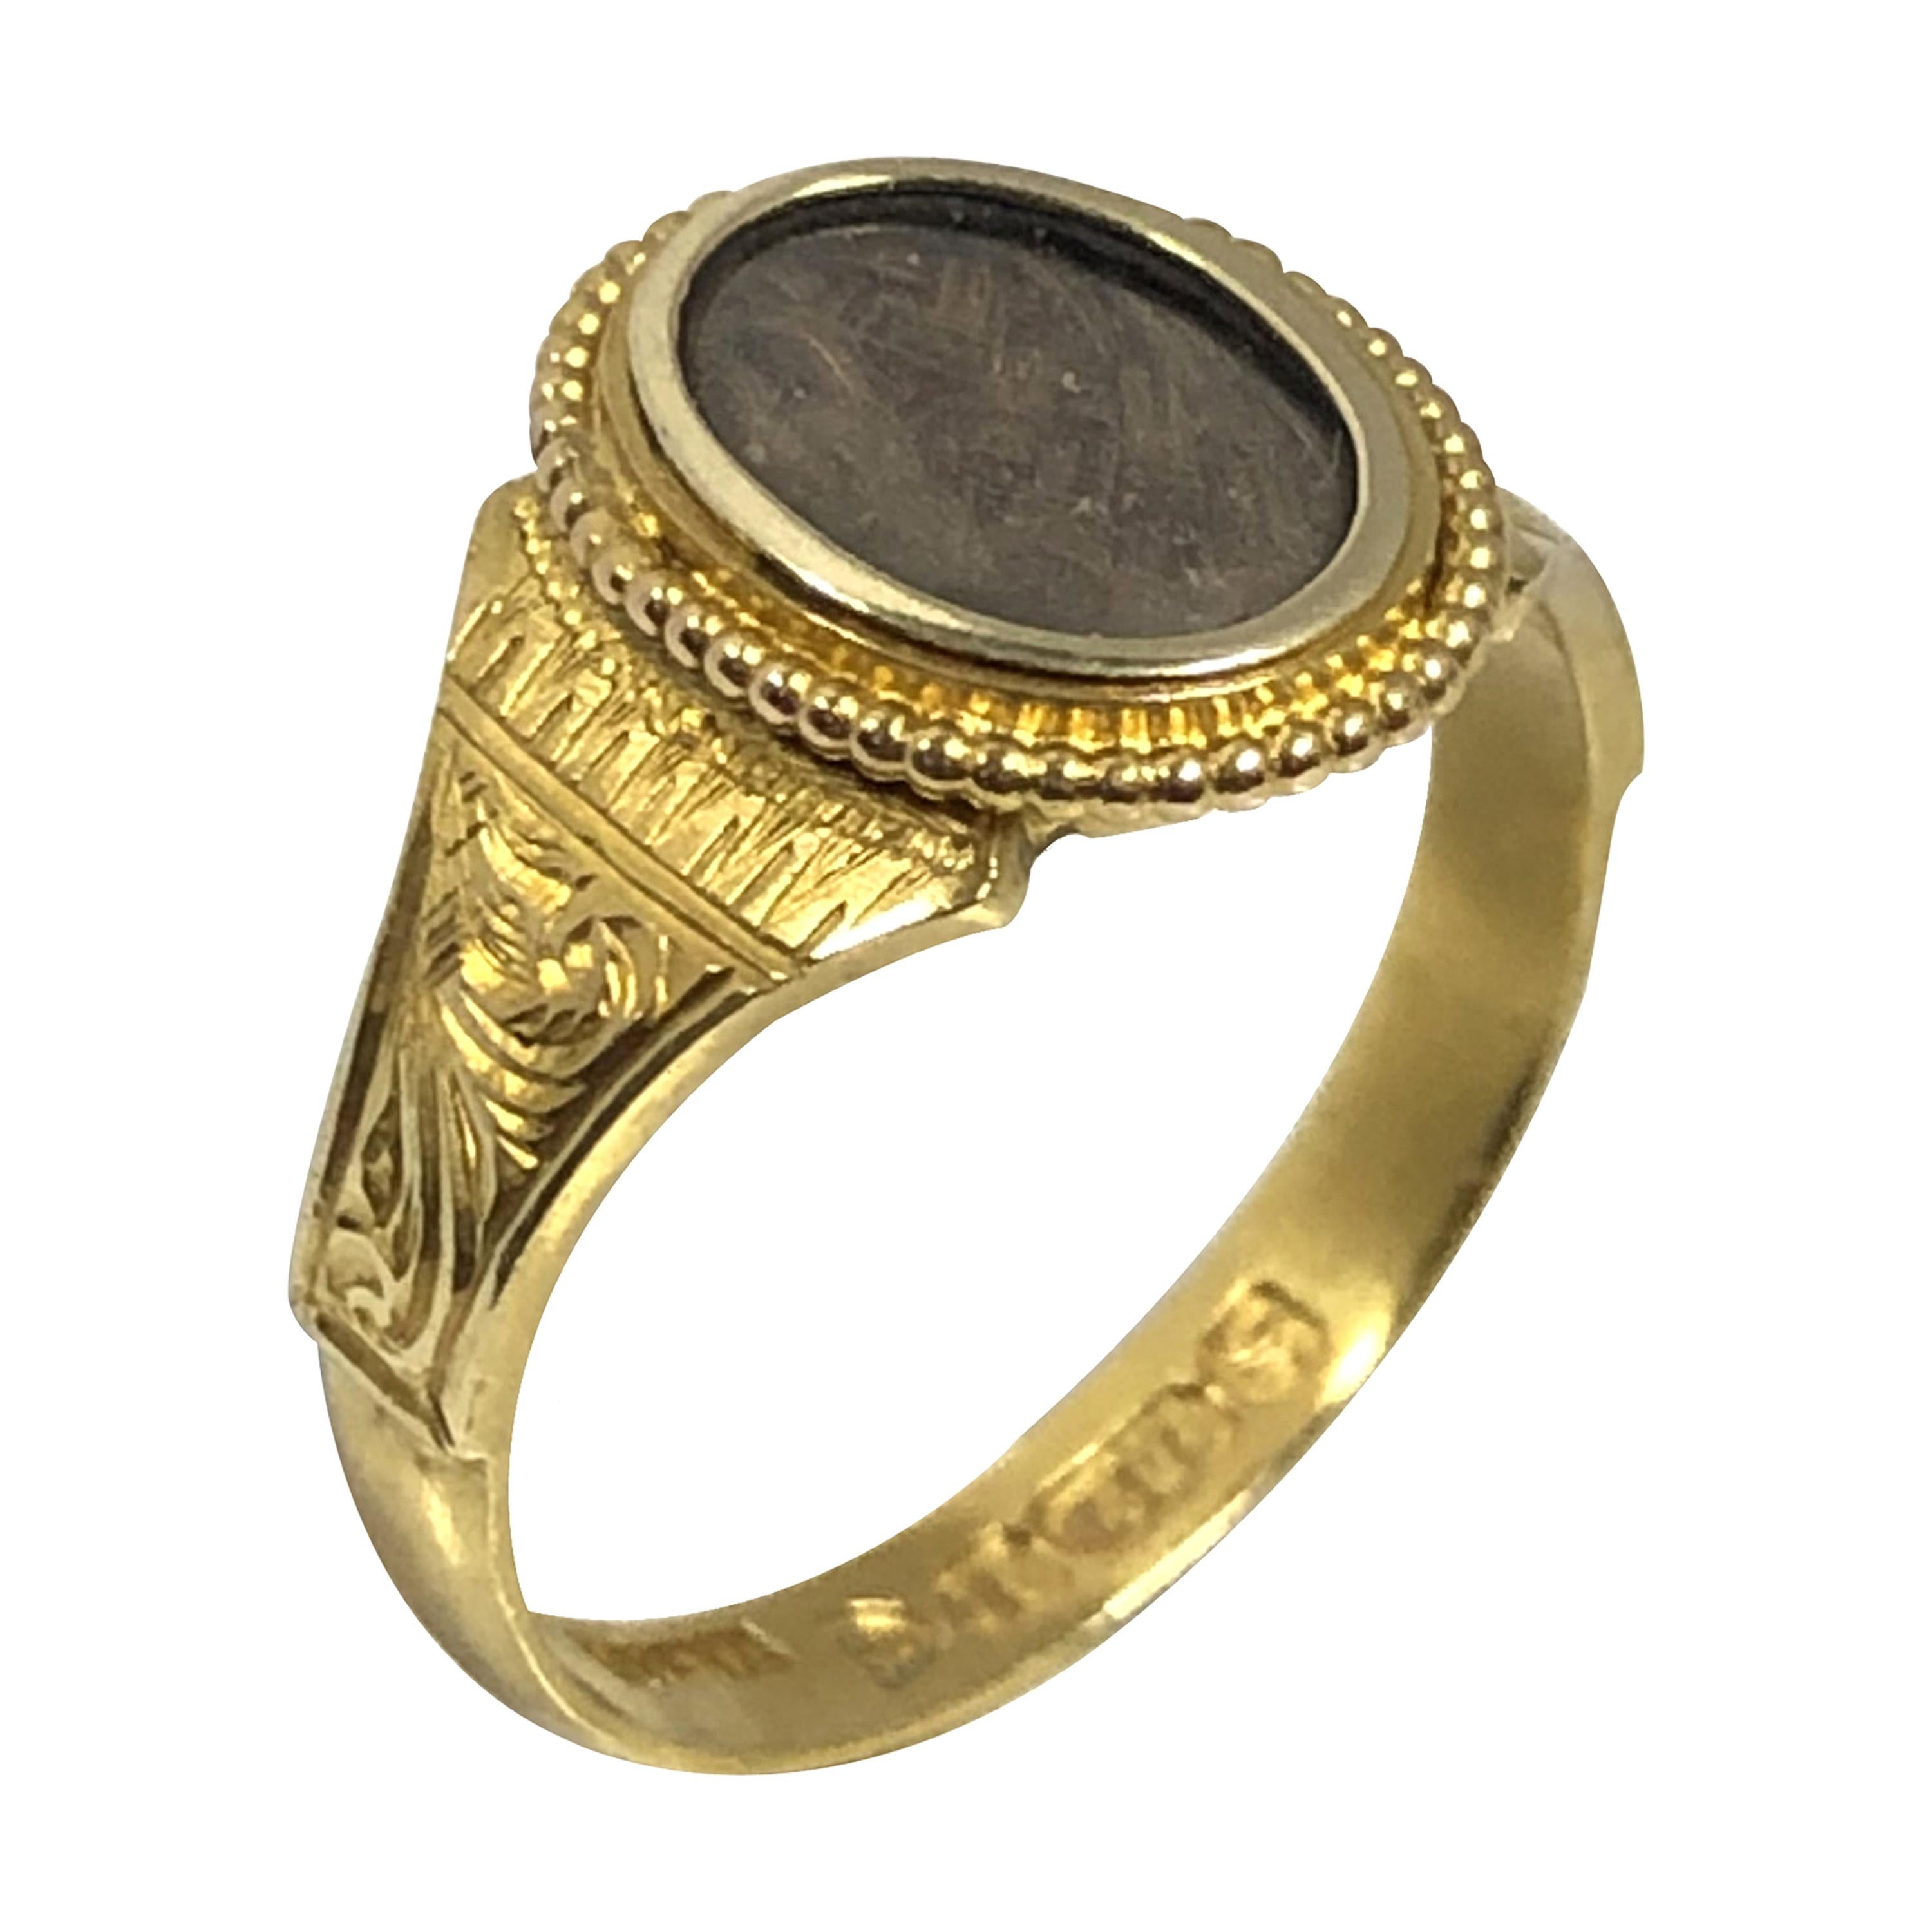 Victorian Memorial Memento Yellow Gold and Woven Hair Ring